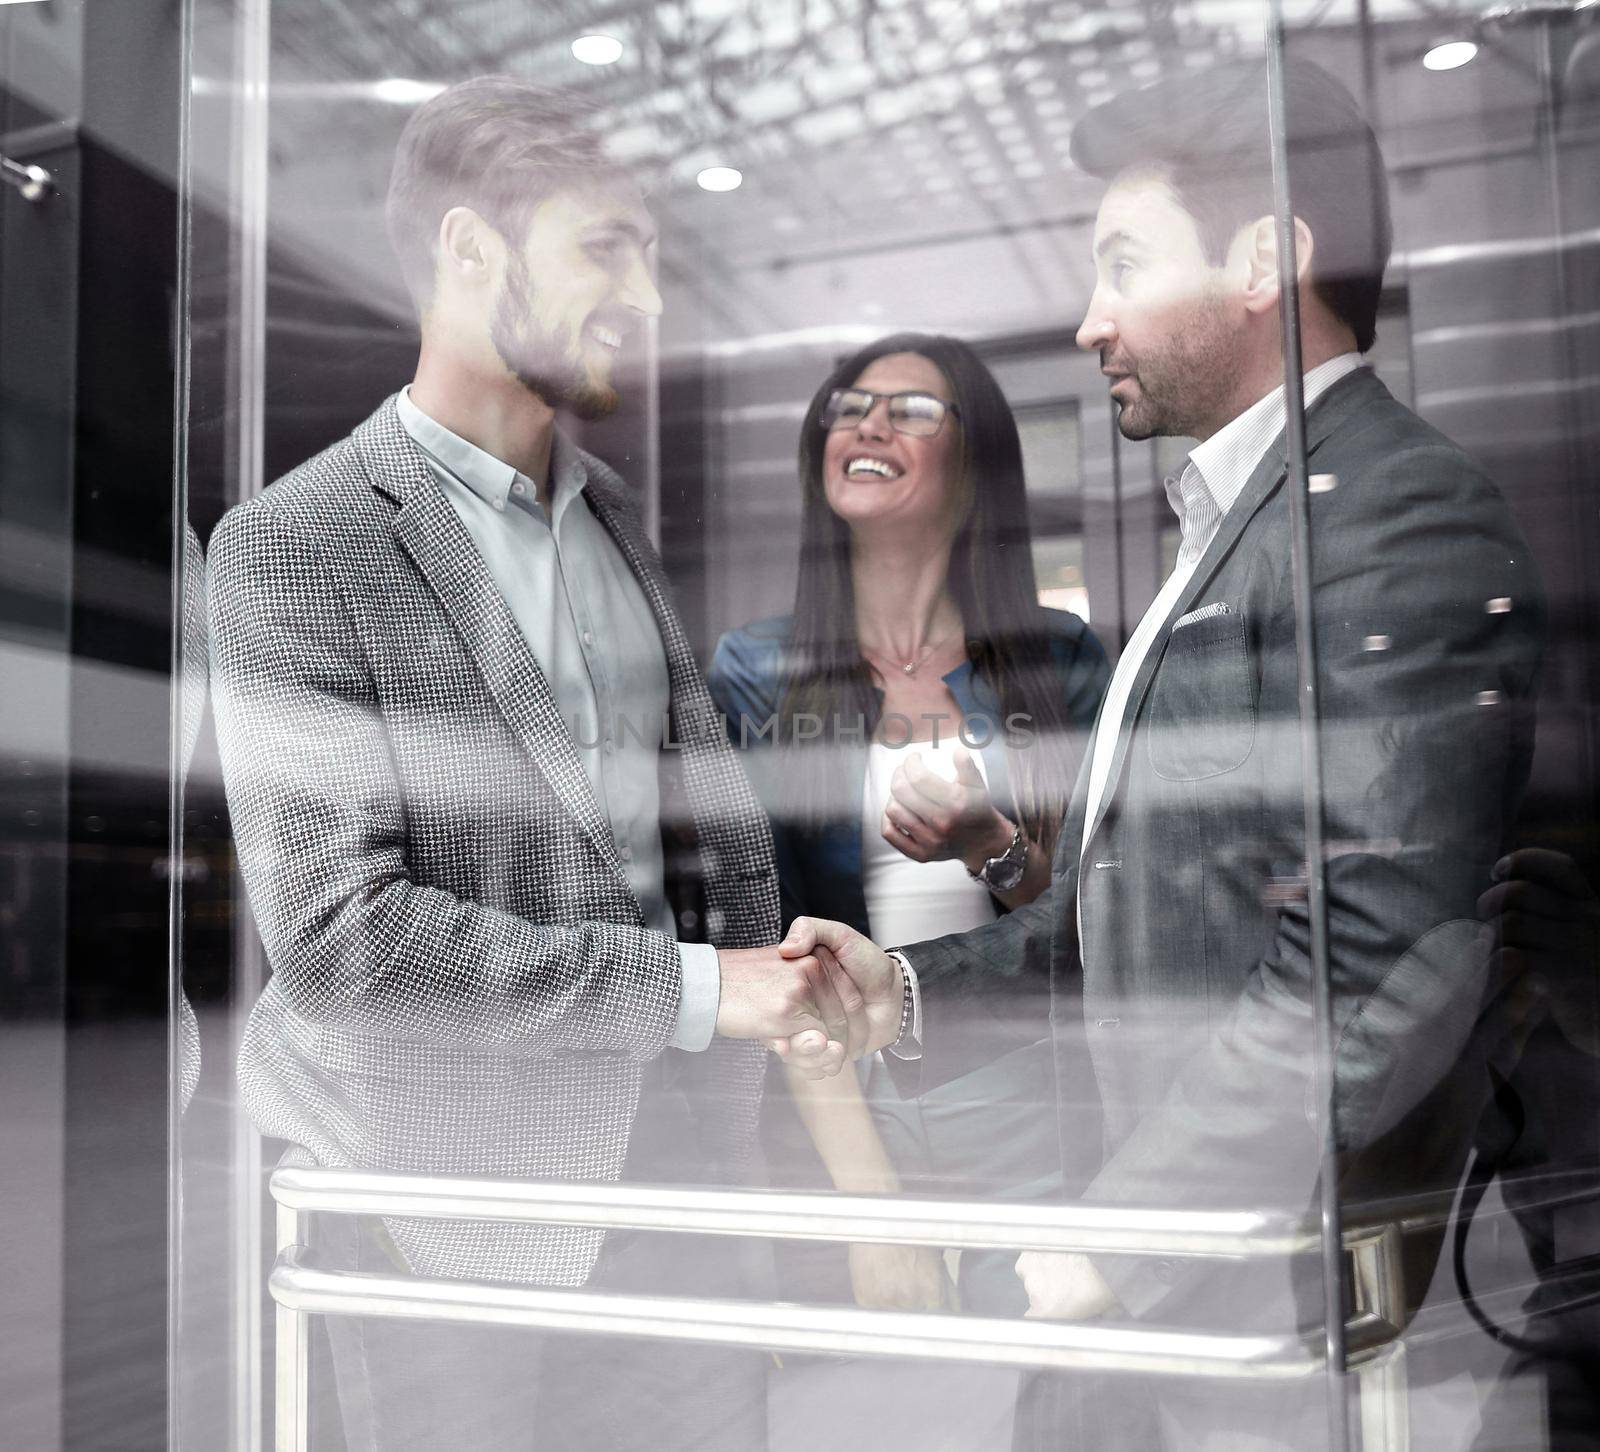 colleagues shaking hands in the Elevator.business concept